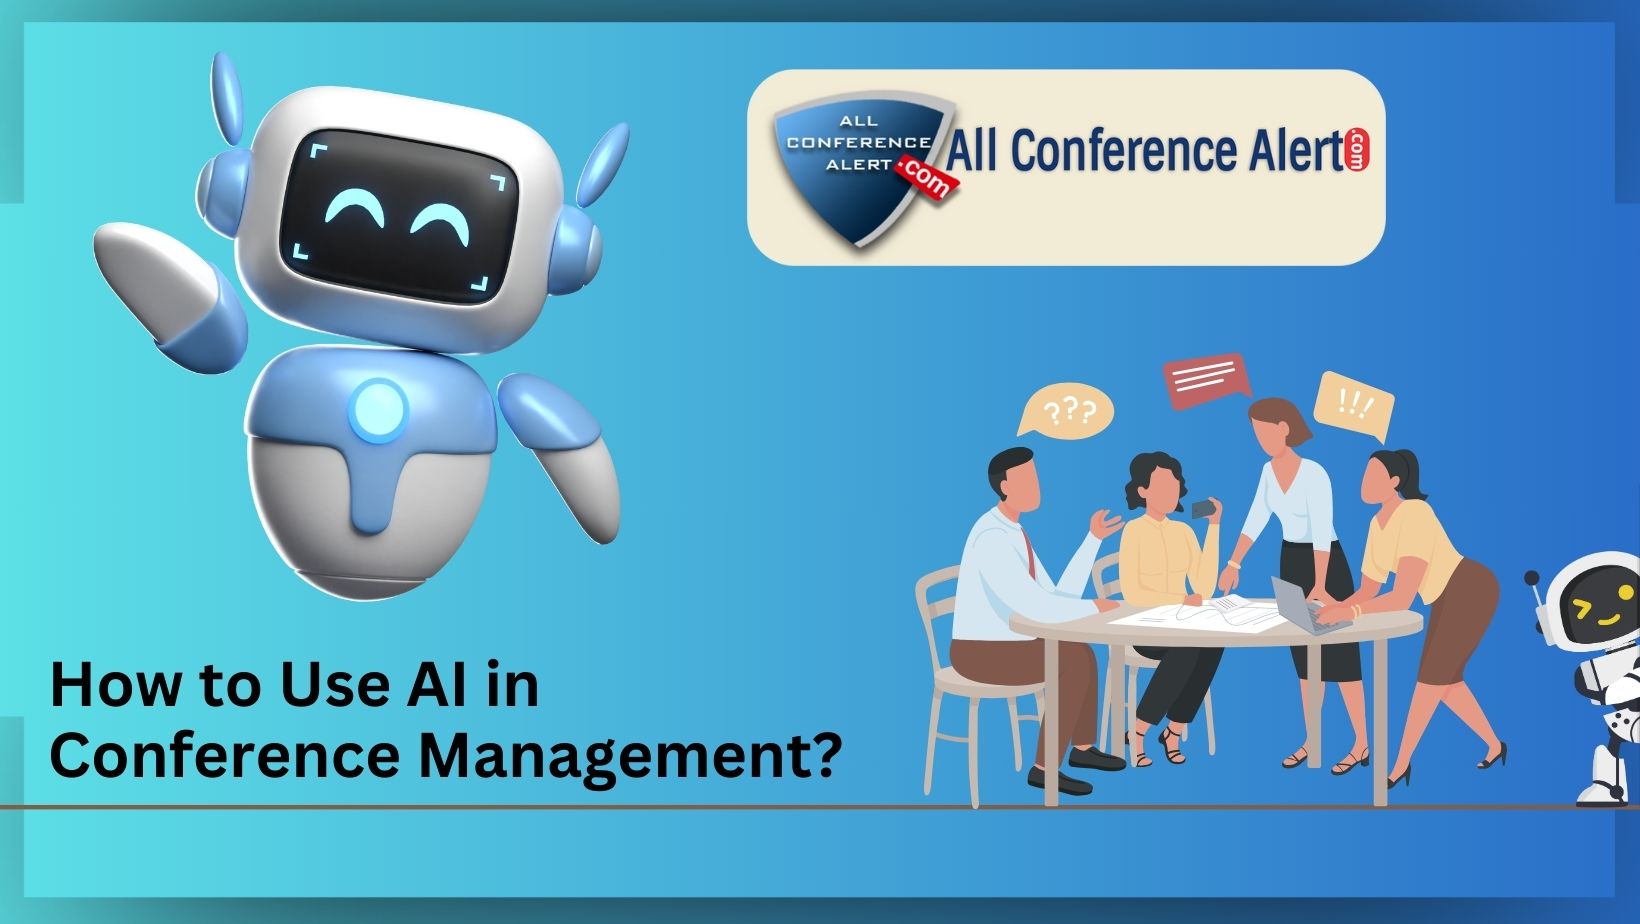 How to Use AI in Conference Management